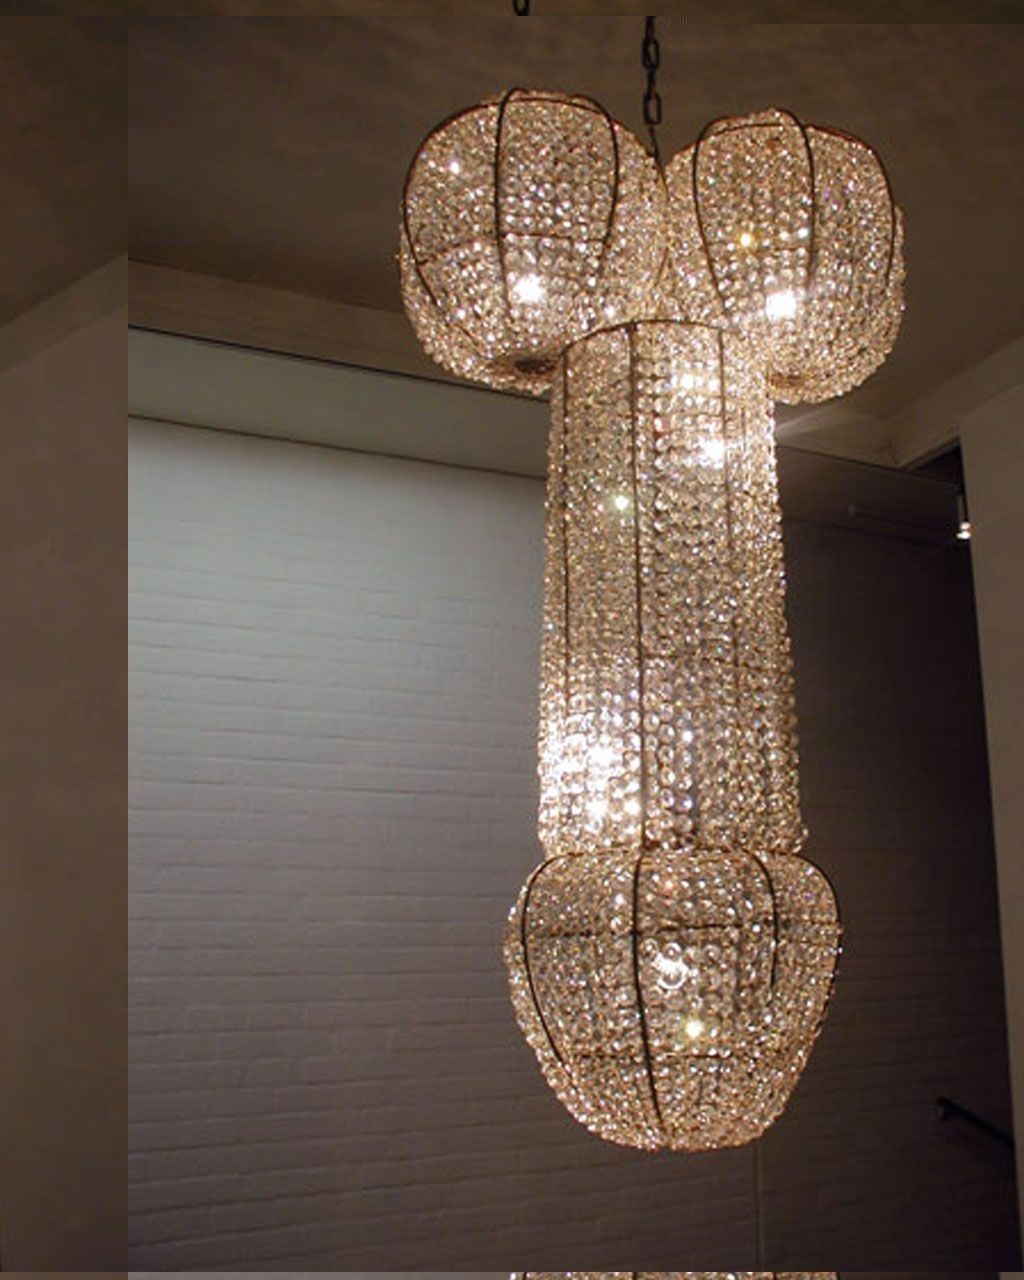 Contemporary Chandeliers With Regard To Most Up To Date Modern Creative Chandeliers Design – Looks More Like A Penis (View 4 of 20)